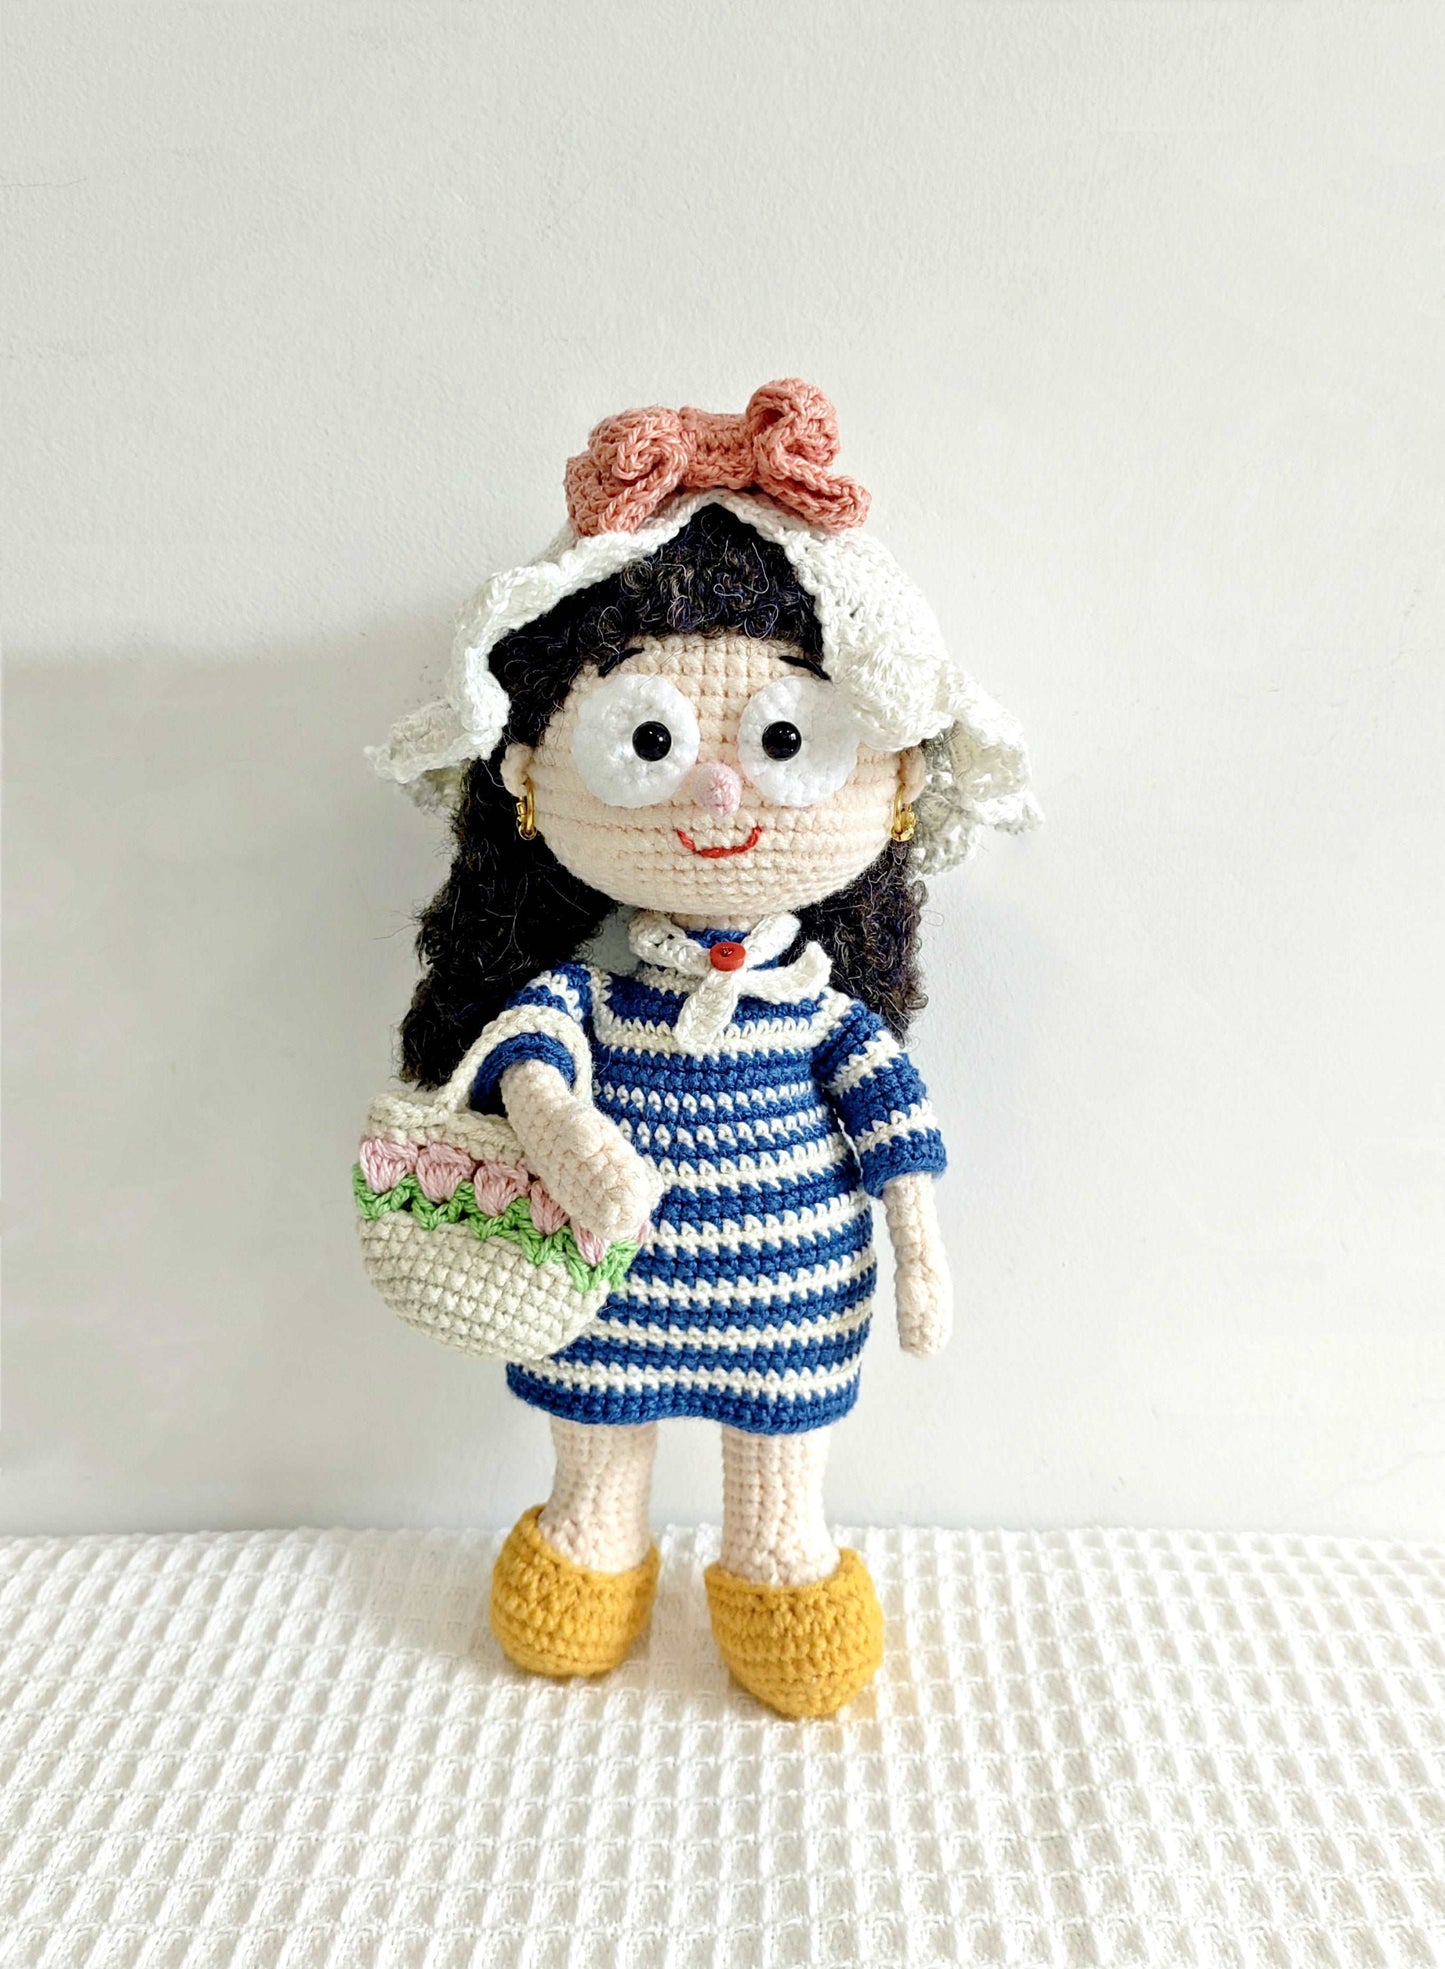 Quirky Handcrafted Crochet Characters